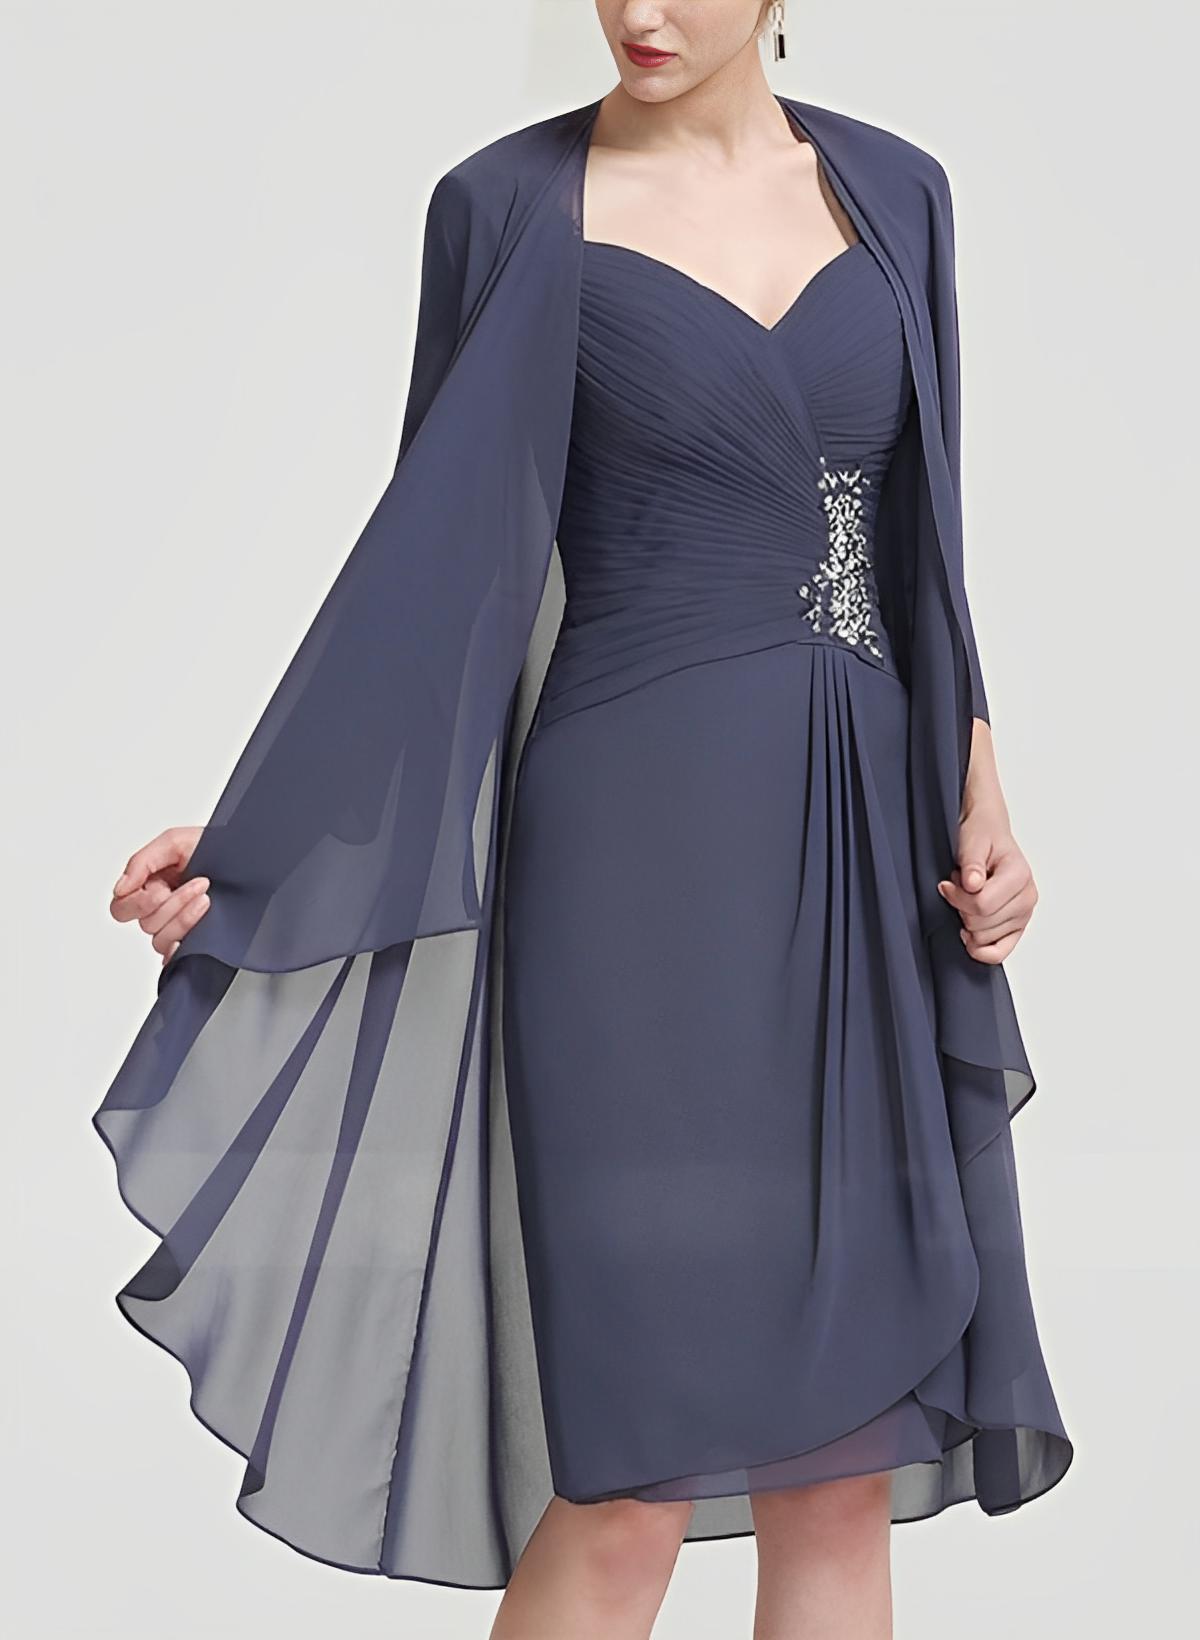 Sheath/Column Sweetheart Knee-Length Chiffon Mother Of The Bride Dress With Beading Pleated Appliques Lace